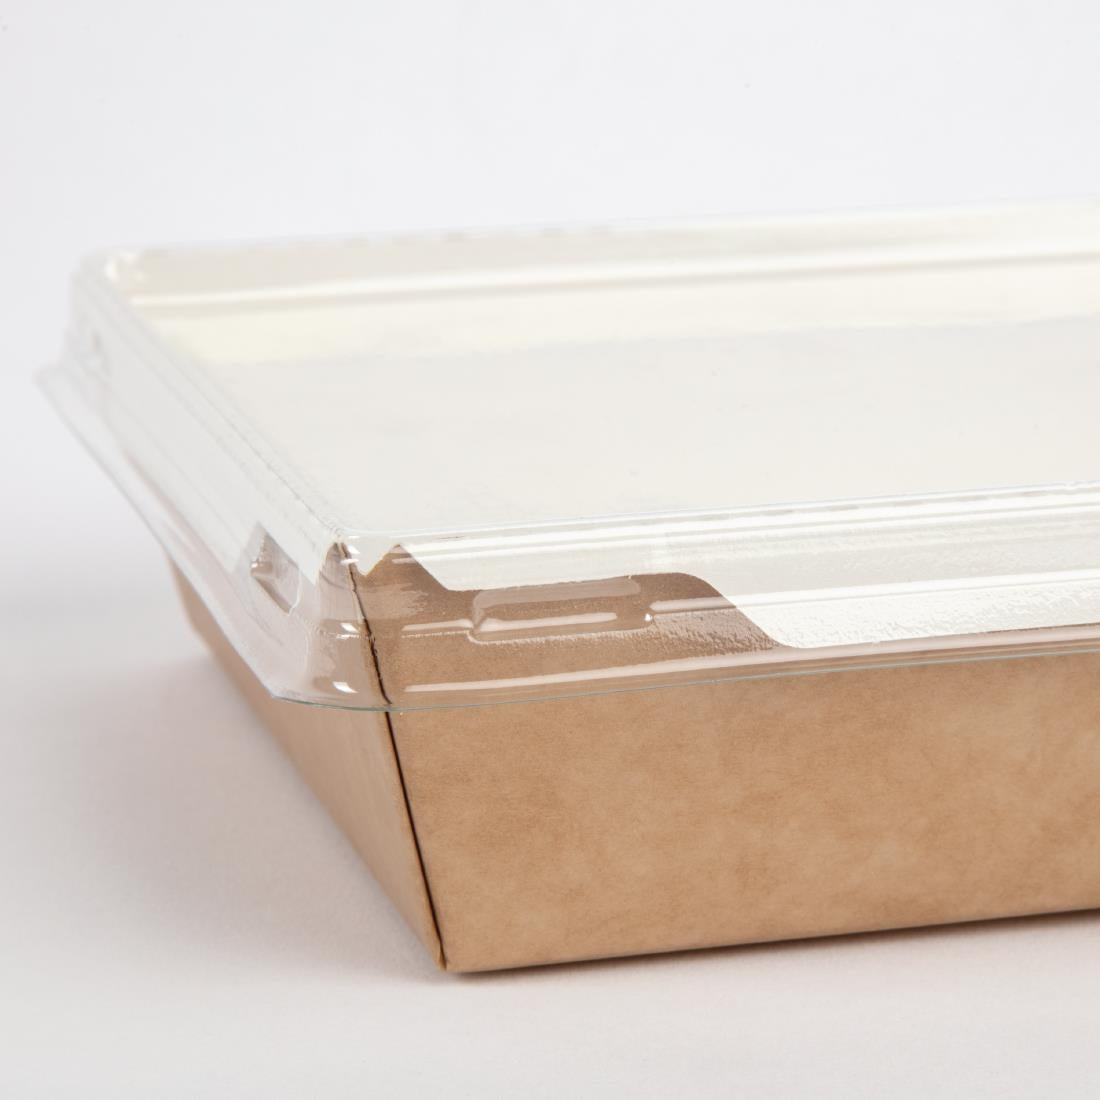 Colpac Fuzione Recyclable Paperboard Food Trays With Lid 1000ml / 35oz JD Catering Equipment Solutions Ltd